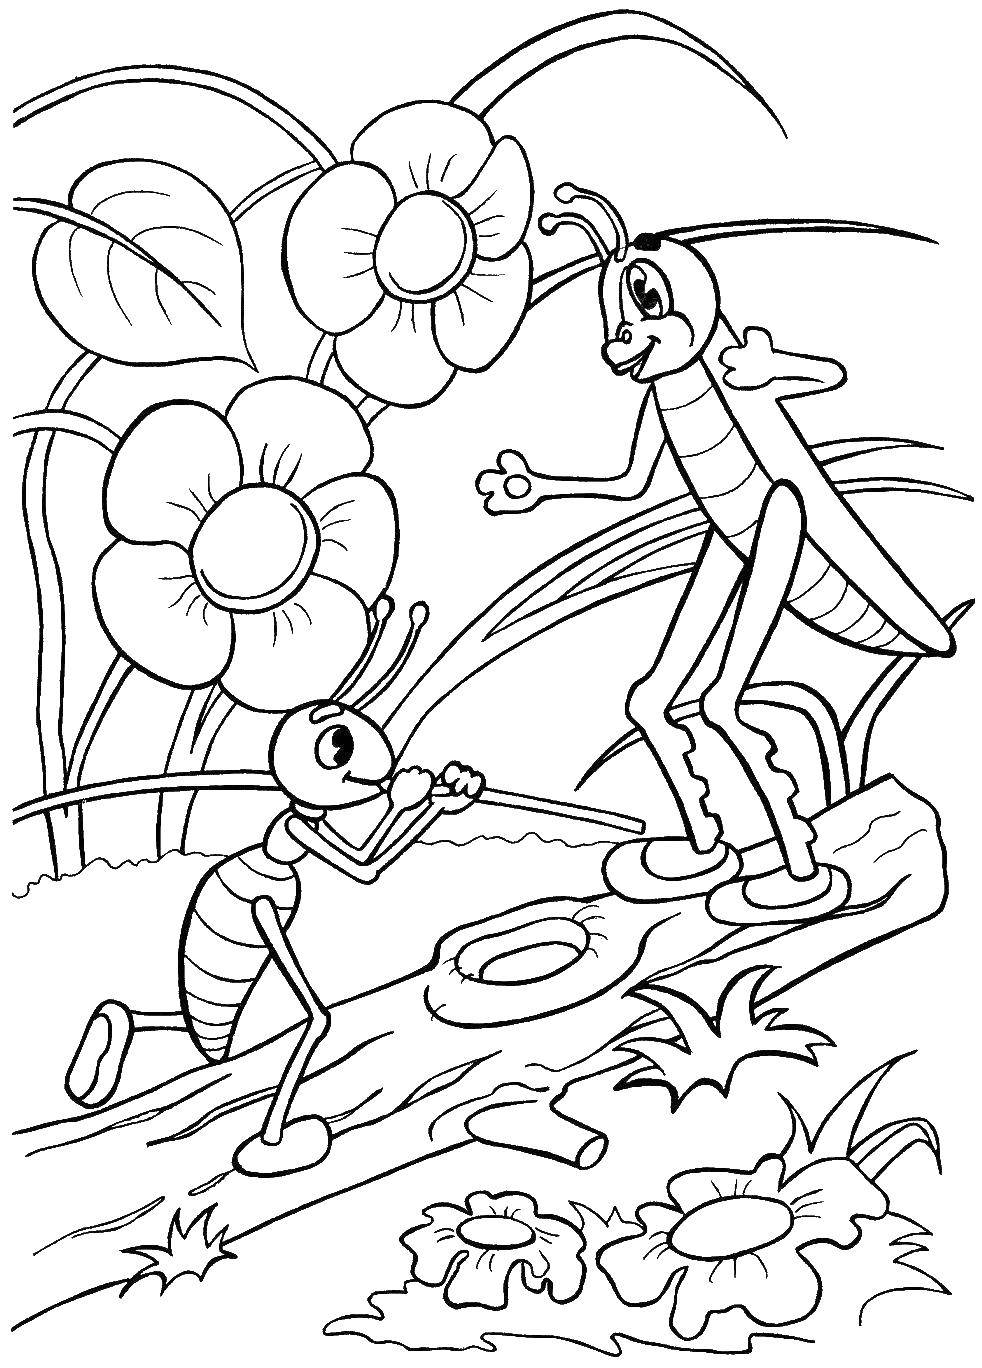 Coloring The ant and the grasshopper. Category Fairy tales. Tags:  The ant , grasshopper.